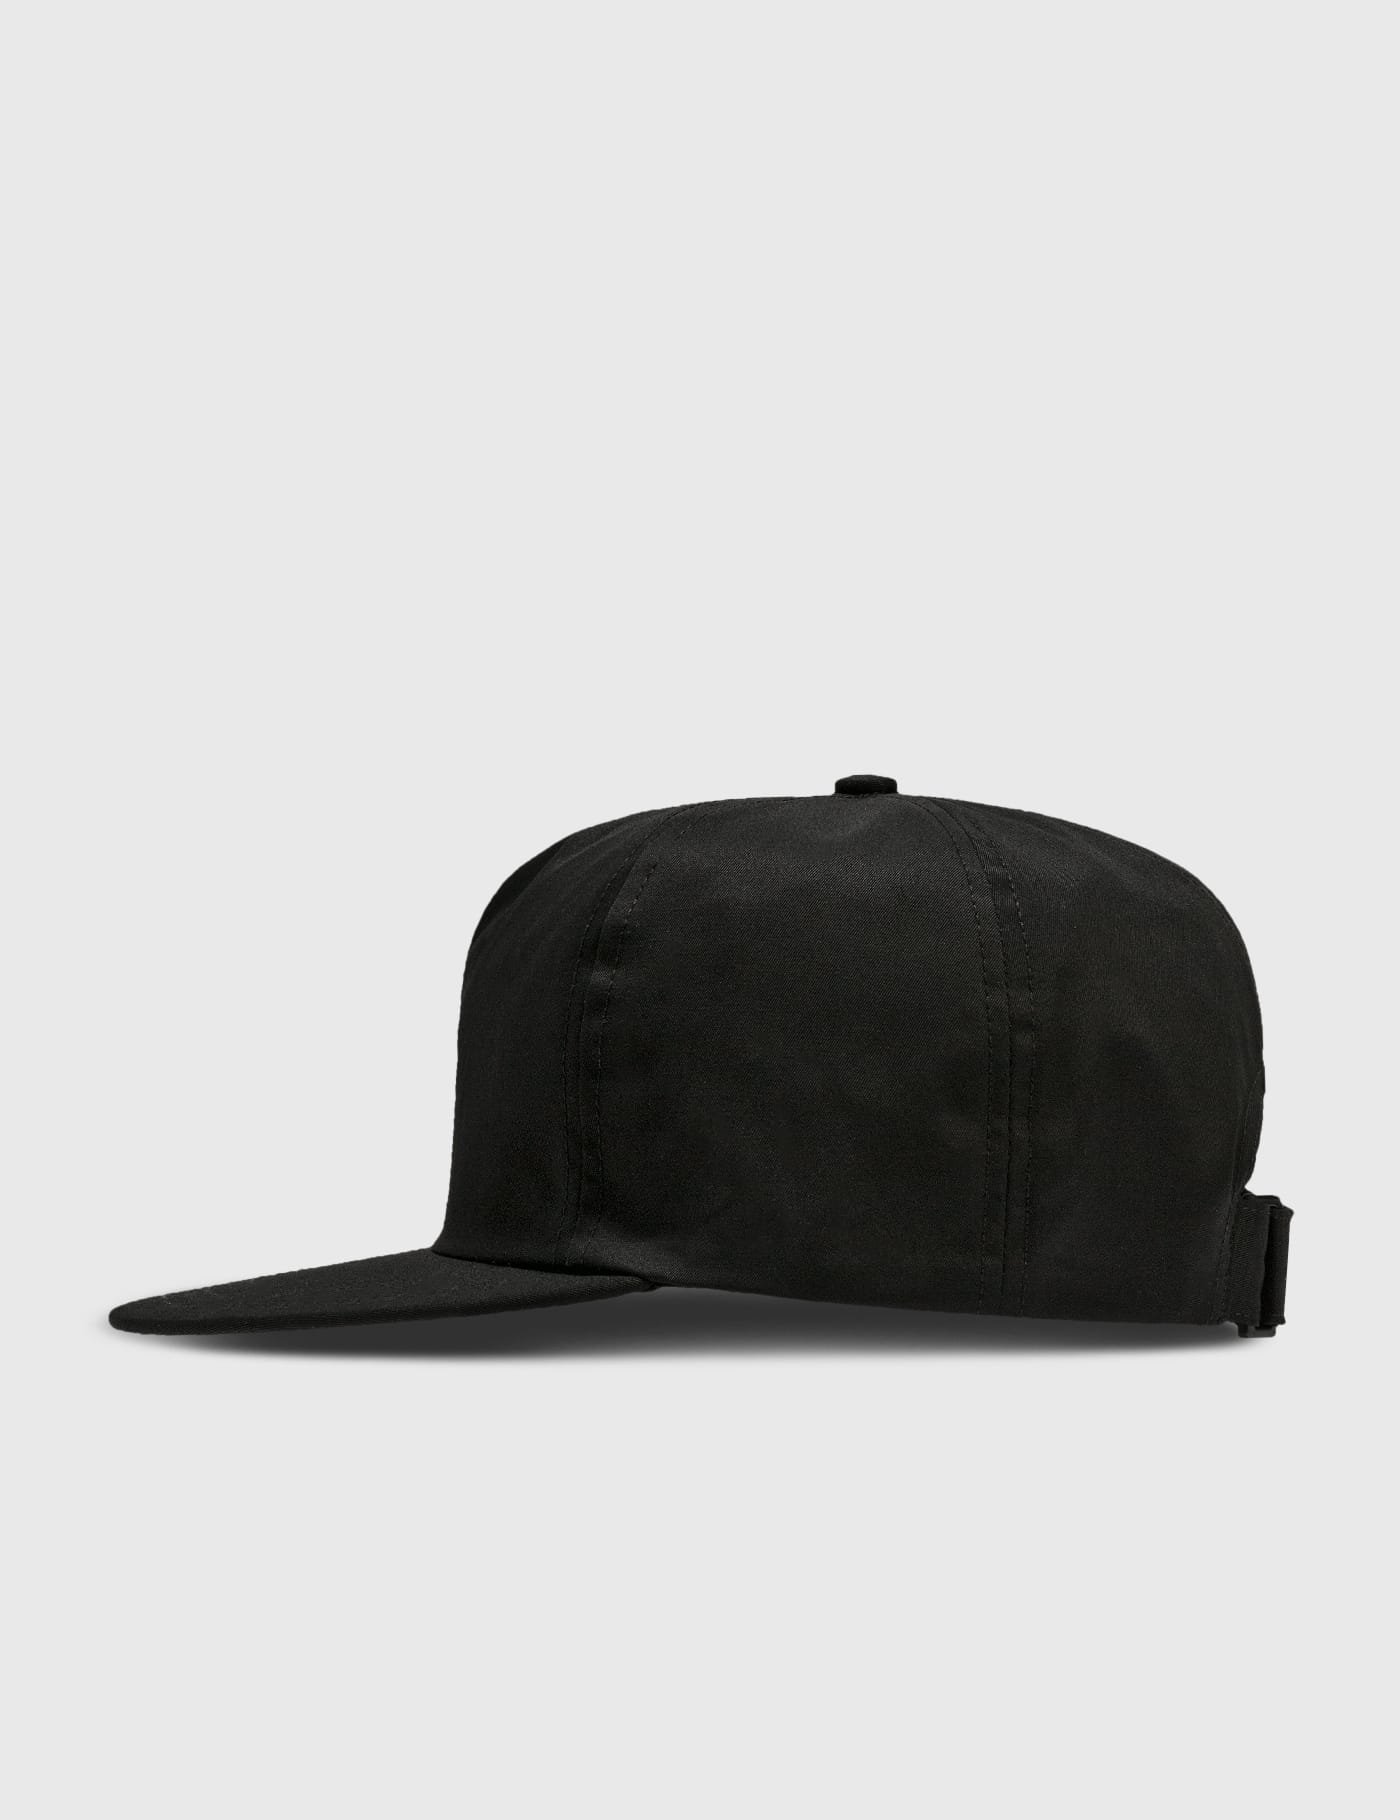 Fear of God   5 Panel Hat   HBX   Globally Curated Fashion and